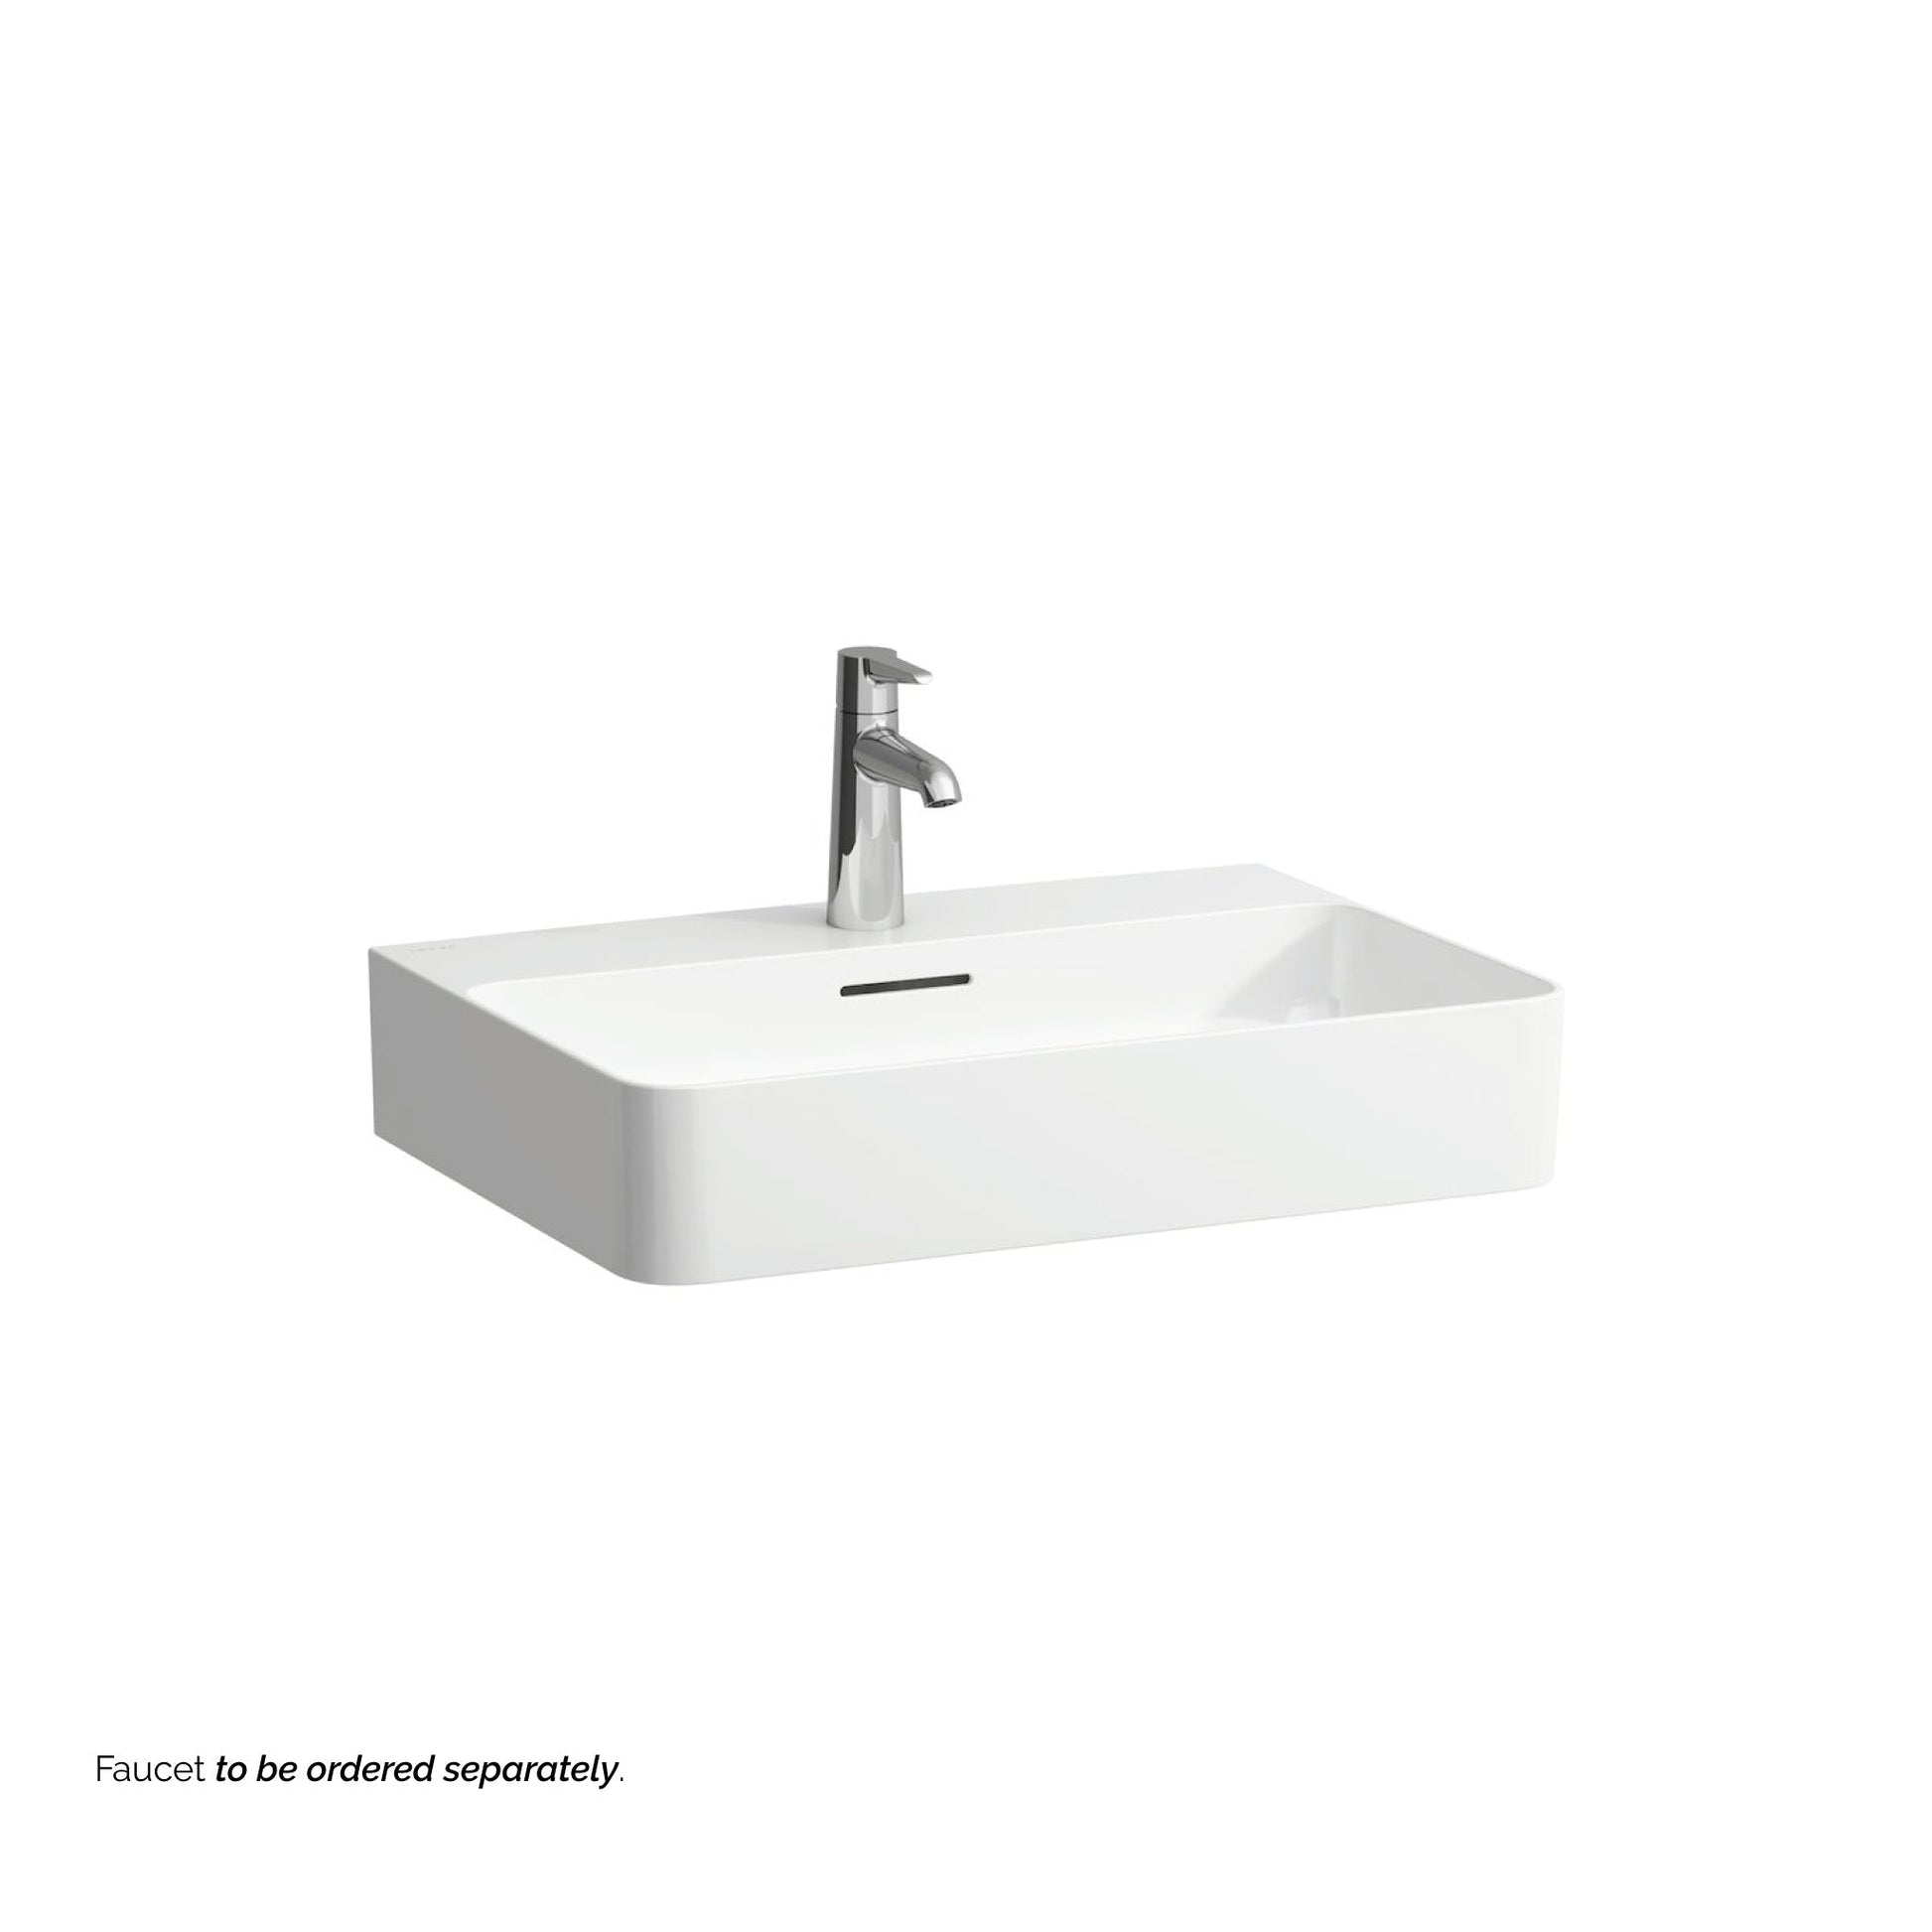 Laufen Val 24" x 17" White Ceramic Countertop Bathroom Sink With Faucet Hole